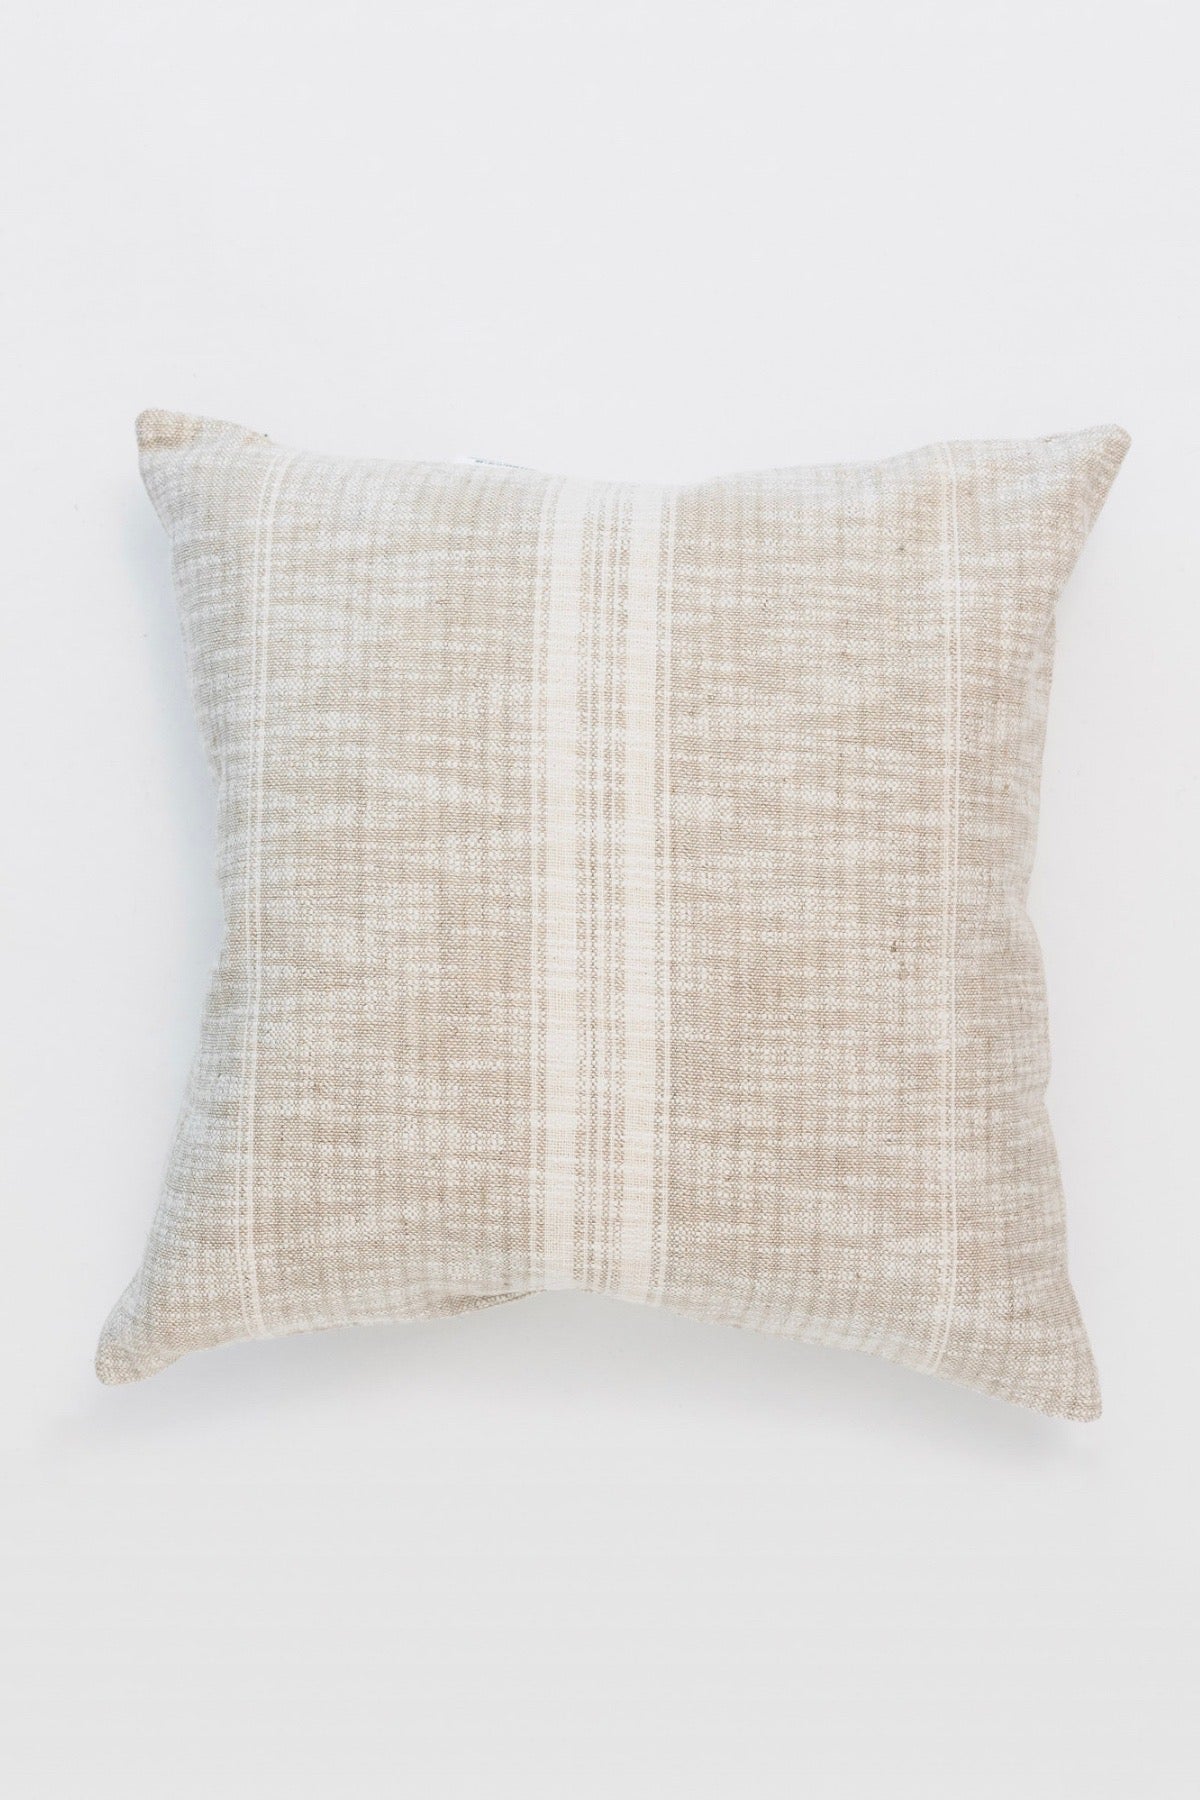 HKliving - Stitched Lines Cushion - Polyester | 30x50 | Cream - Cream